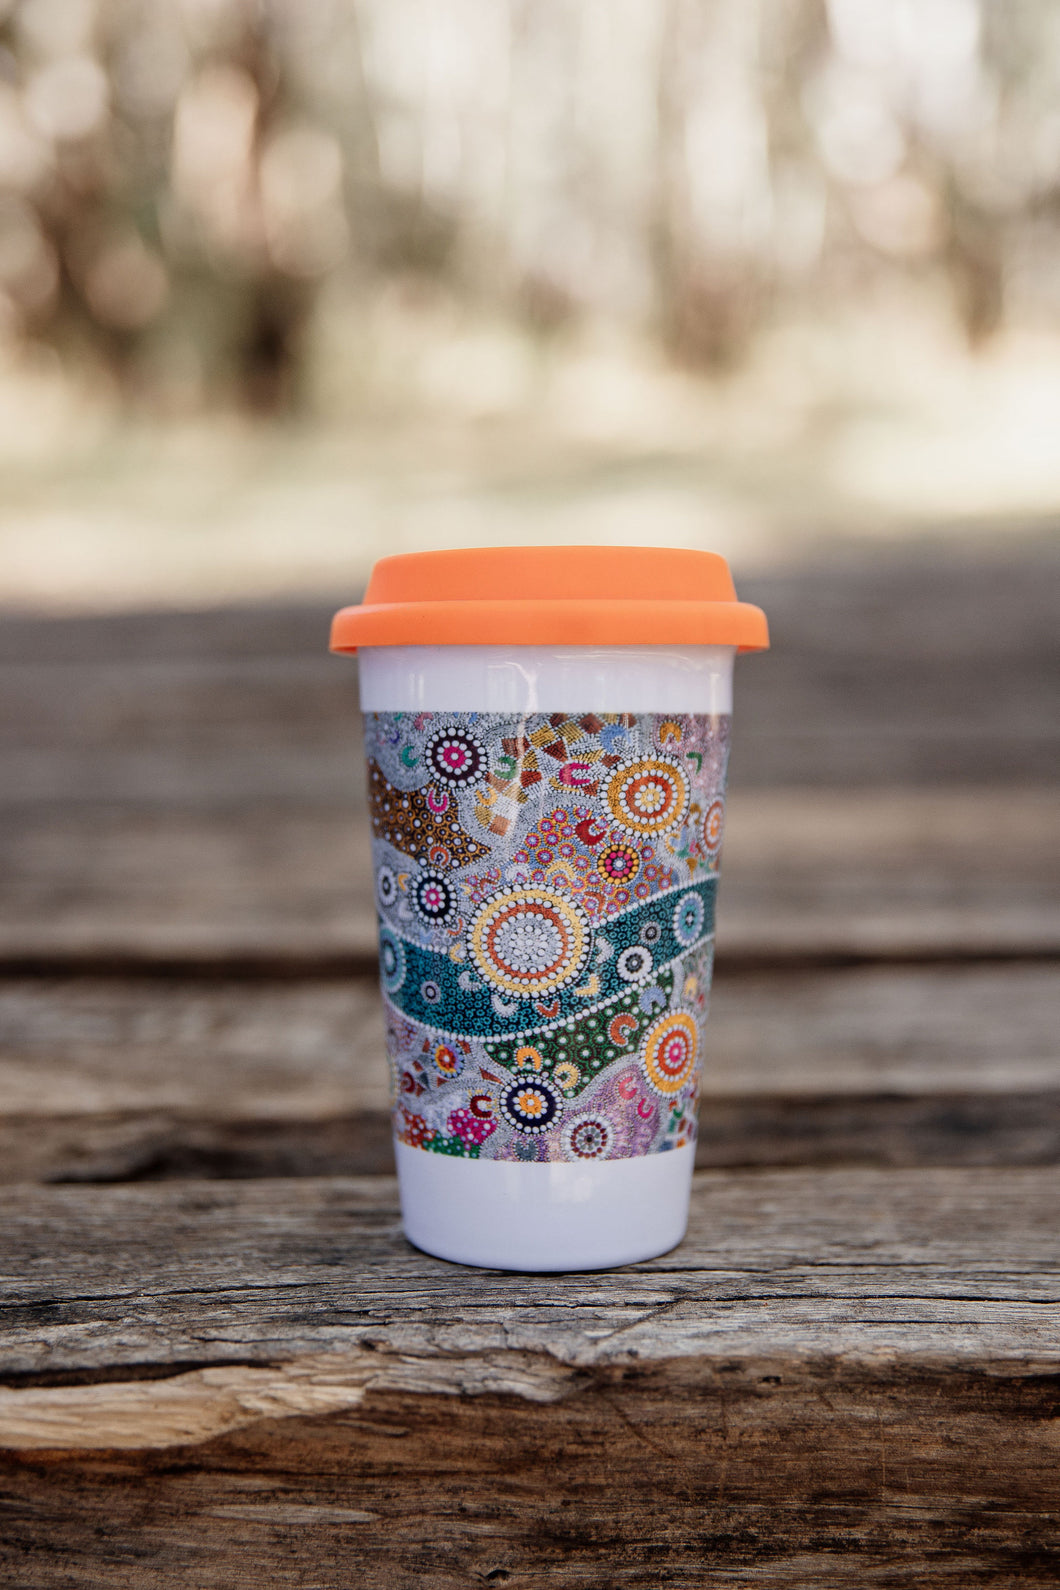 These Wiradjuri Art ceramic Keep Cups / Travel Mugs come printed with the Wiradjuri River People artwork. Cups are sold individually with the lid colour of your choice. There are three lid colours available - Blue, Pink and Orange. Indigenous Art Aboriginal Art First Nations Art